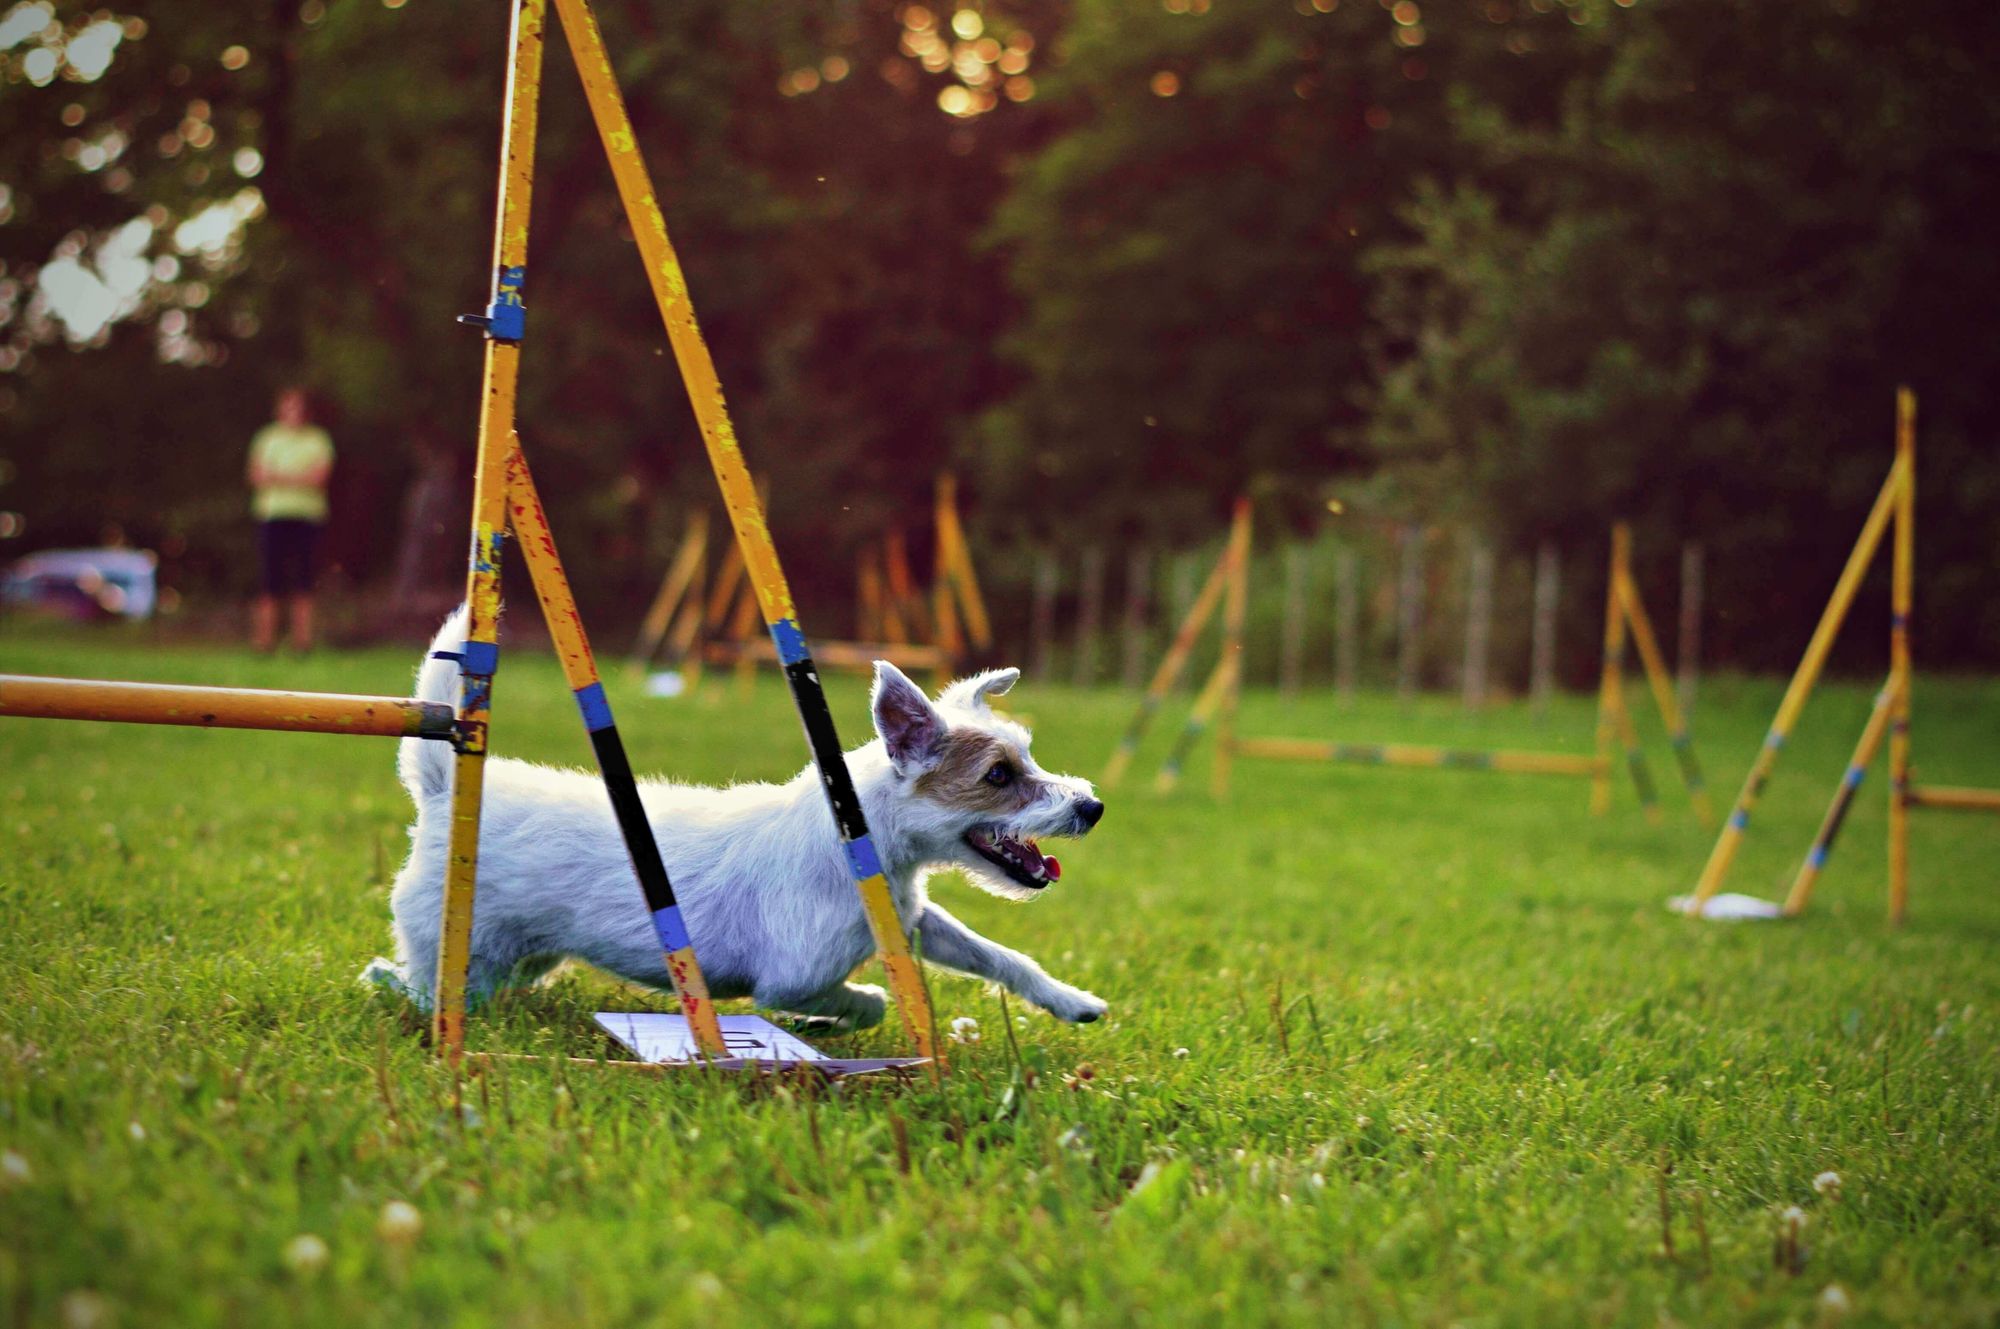 small-jack-russel-terrier-completes-course-during-agility-training-1-